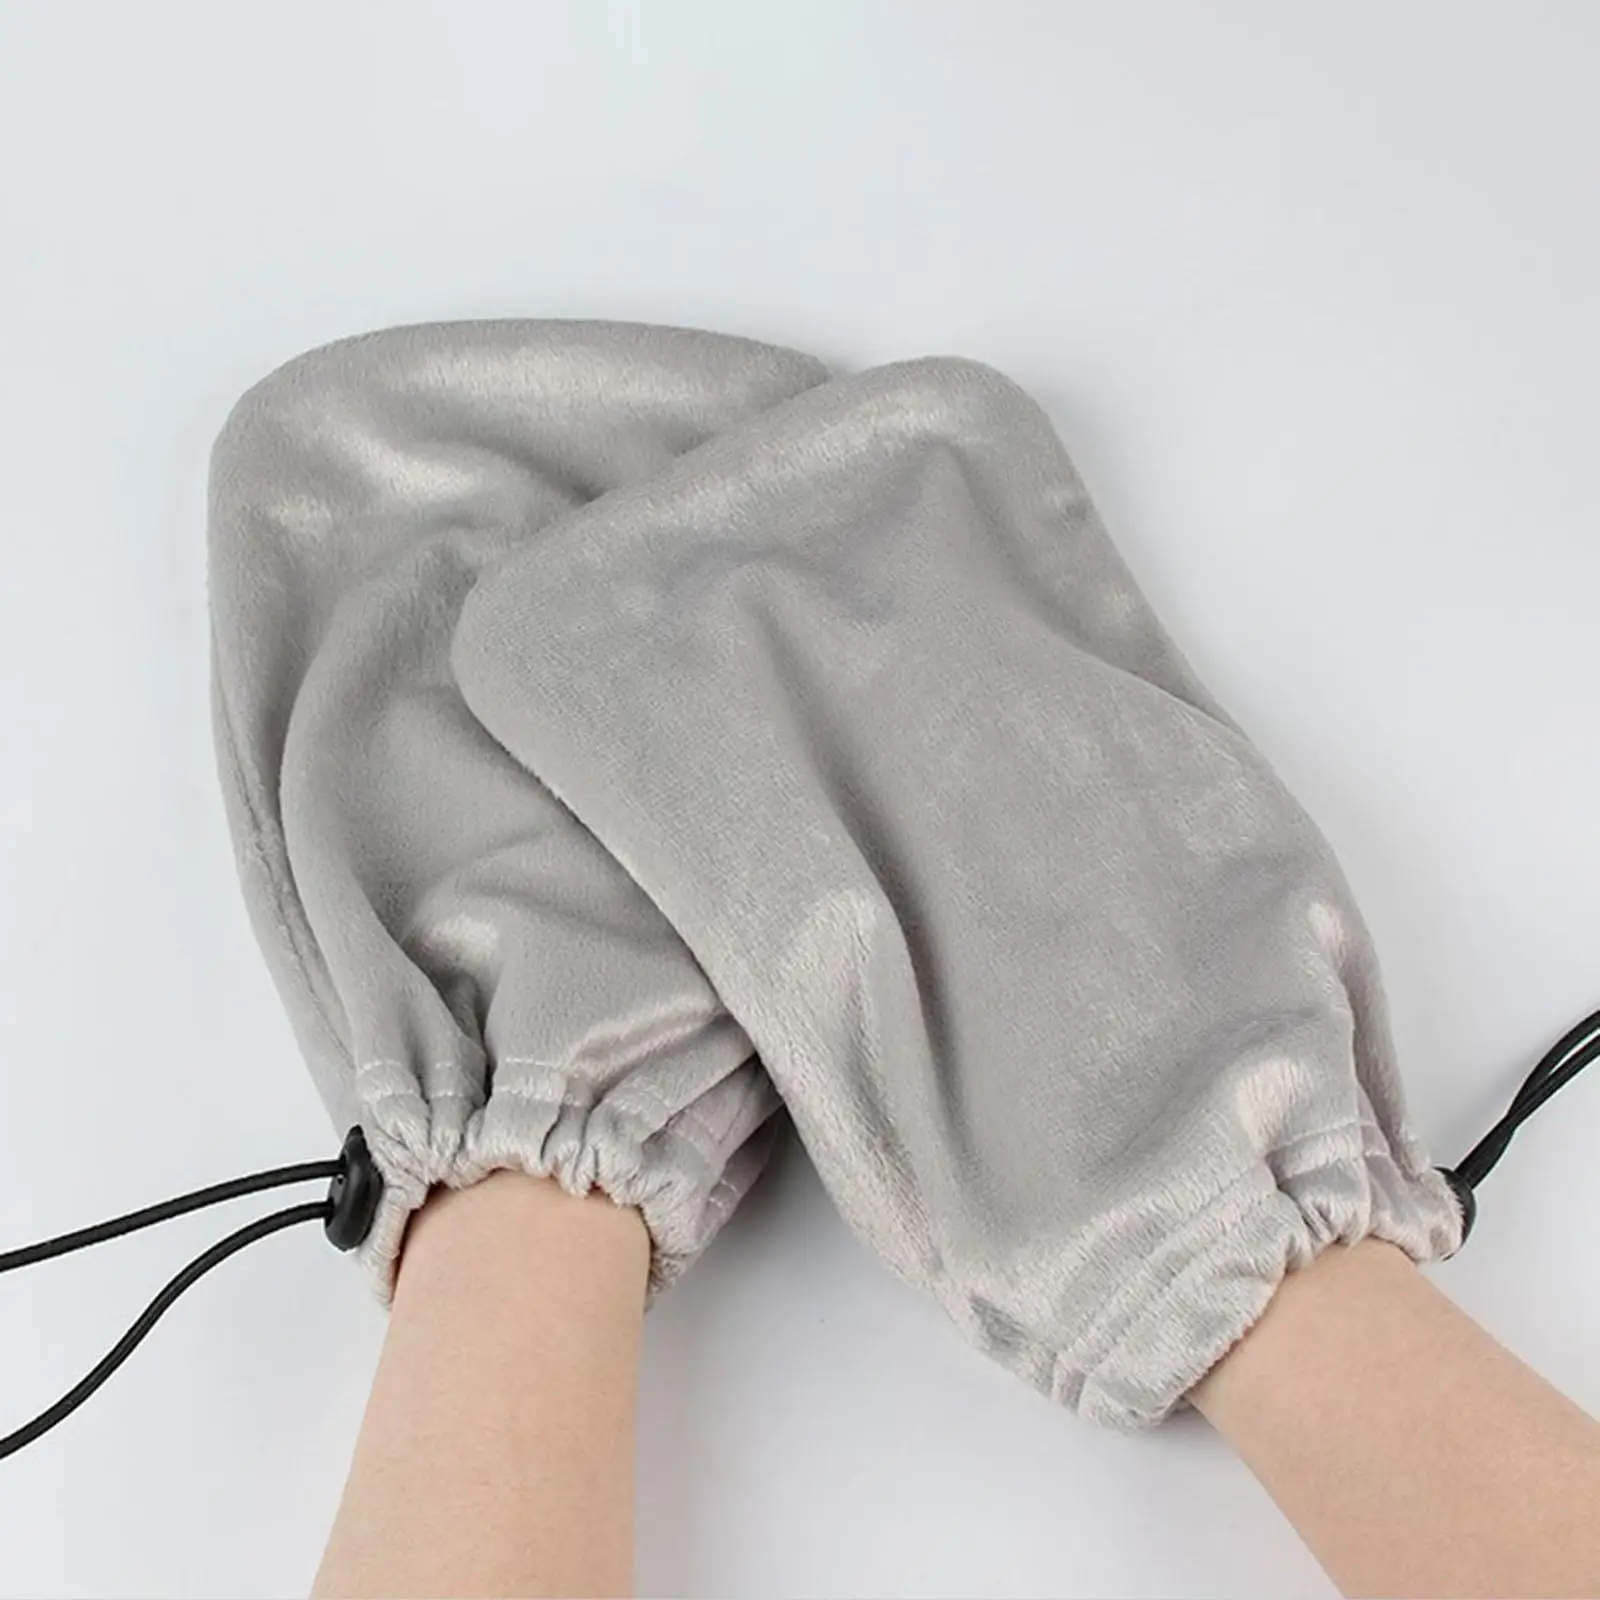  Wax Mitts for Hand  Wax Mitten Moisturizing Cover Bags